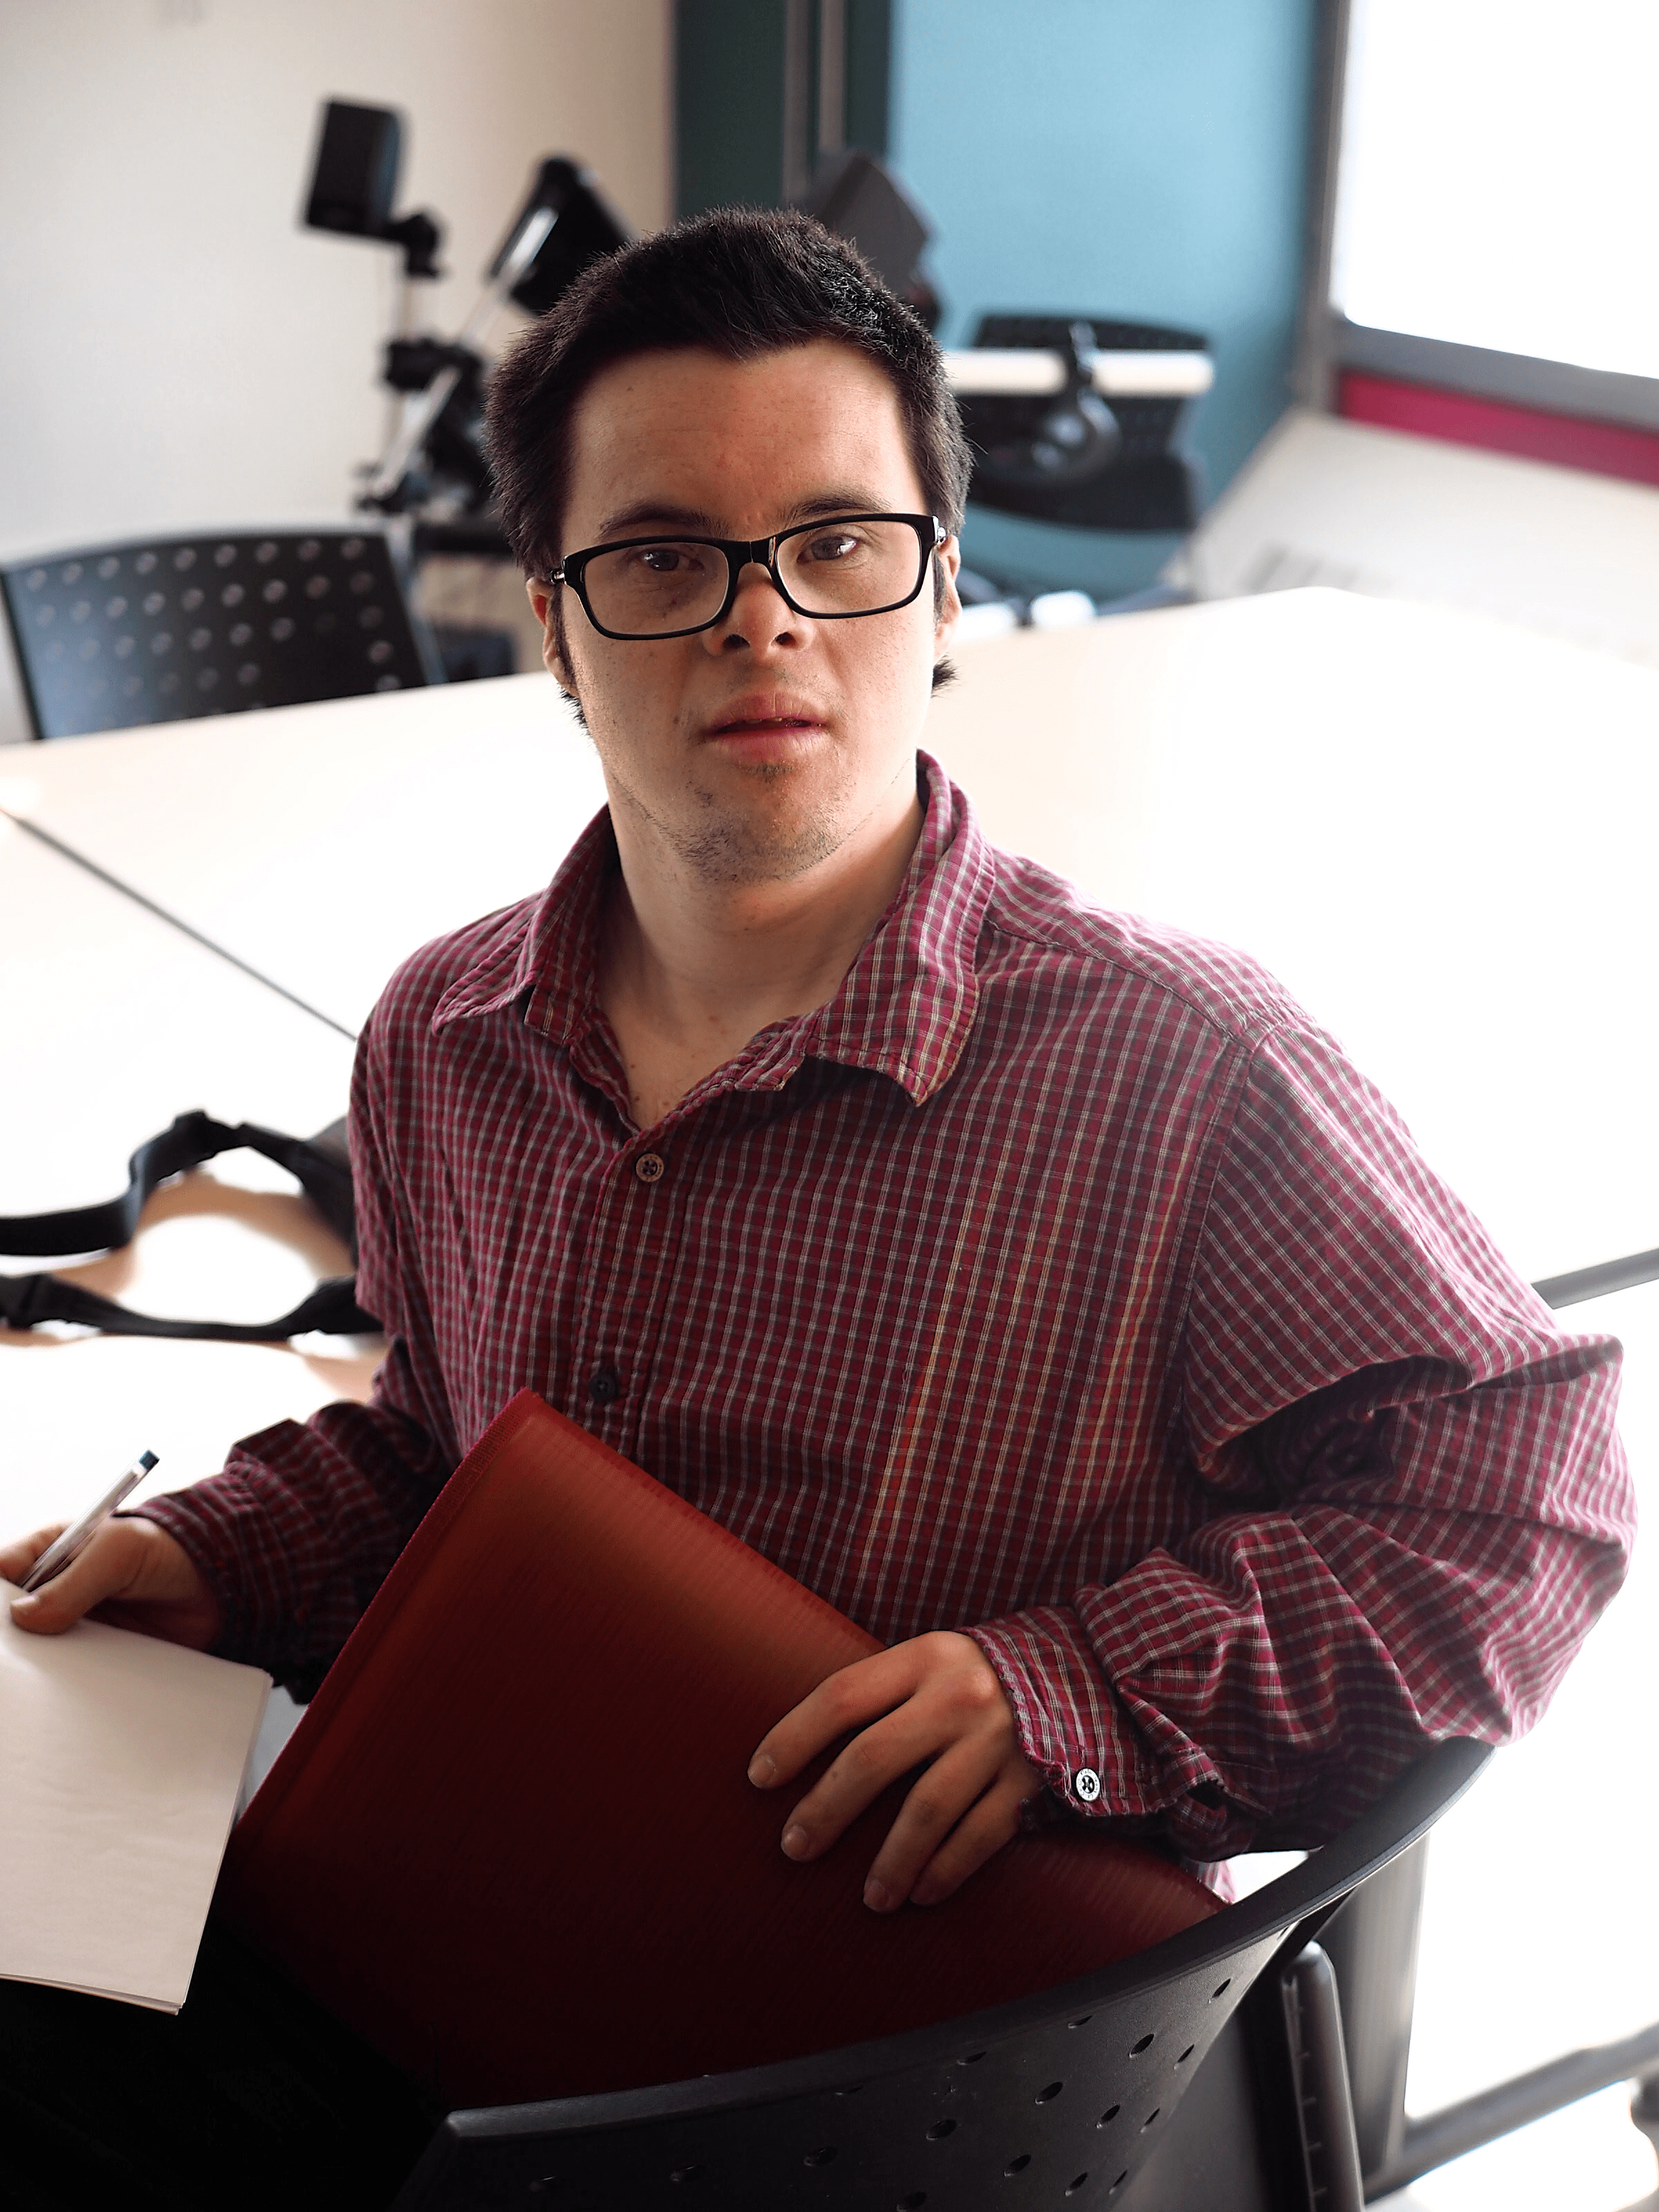 A man wearing glasses is looking at the camera. He is holding a binder.